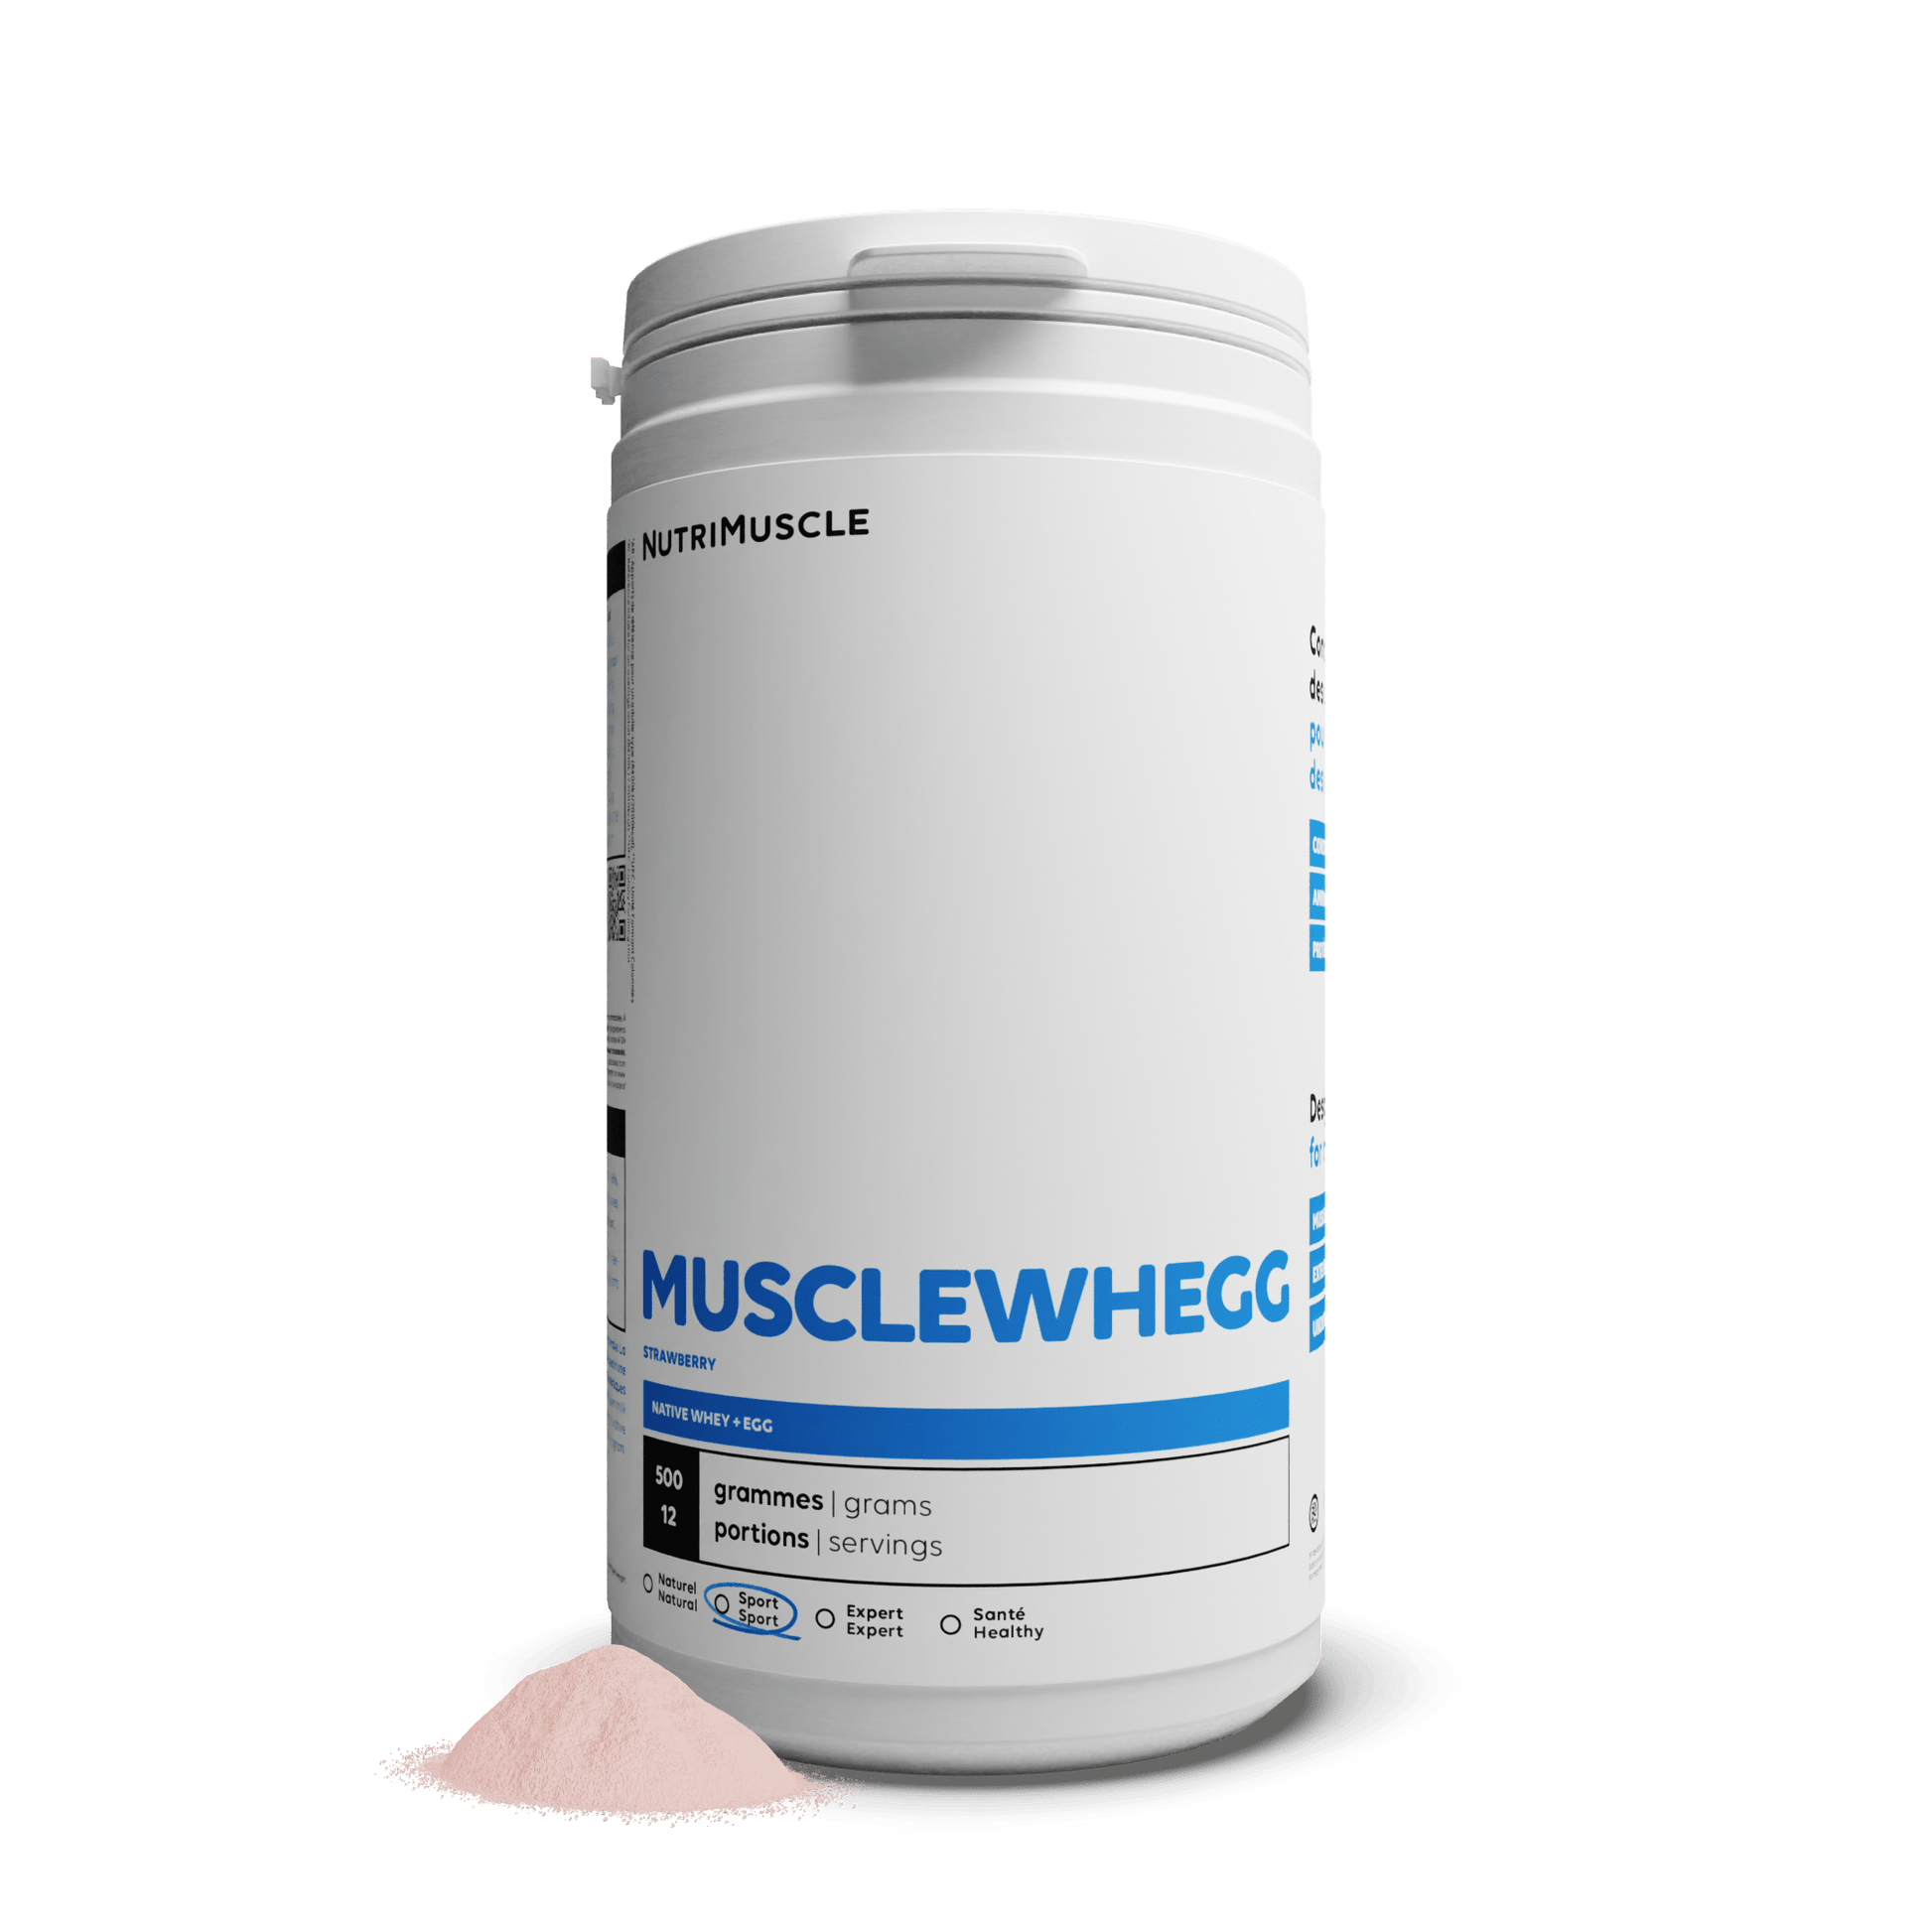 Nutrimuscle Protéines Fraise / 500 g Musclewhegg - Mix Protein